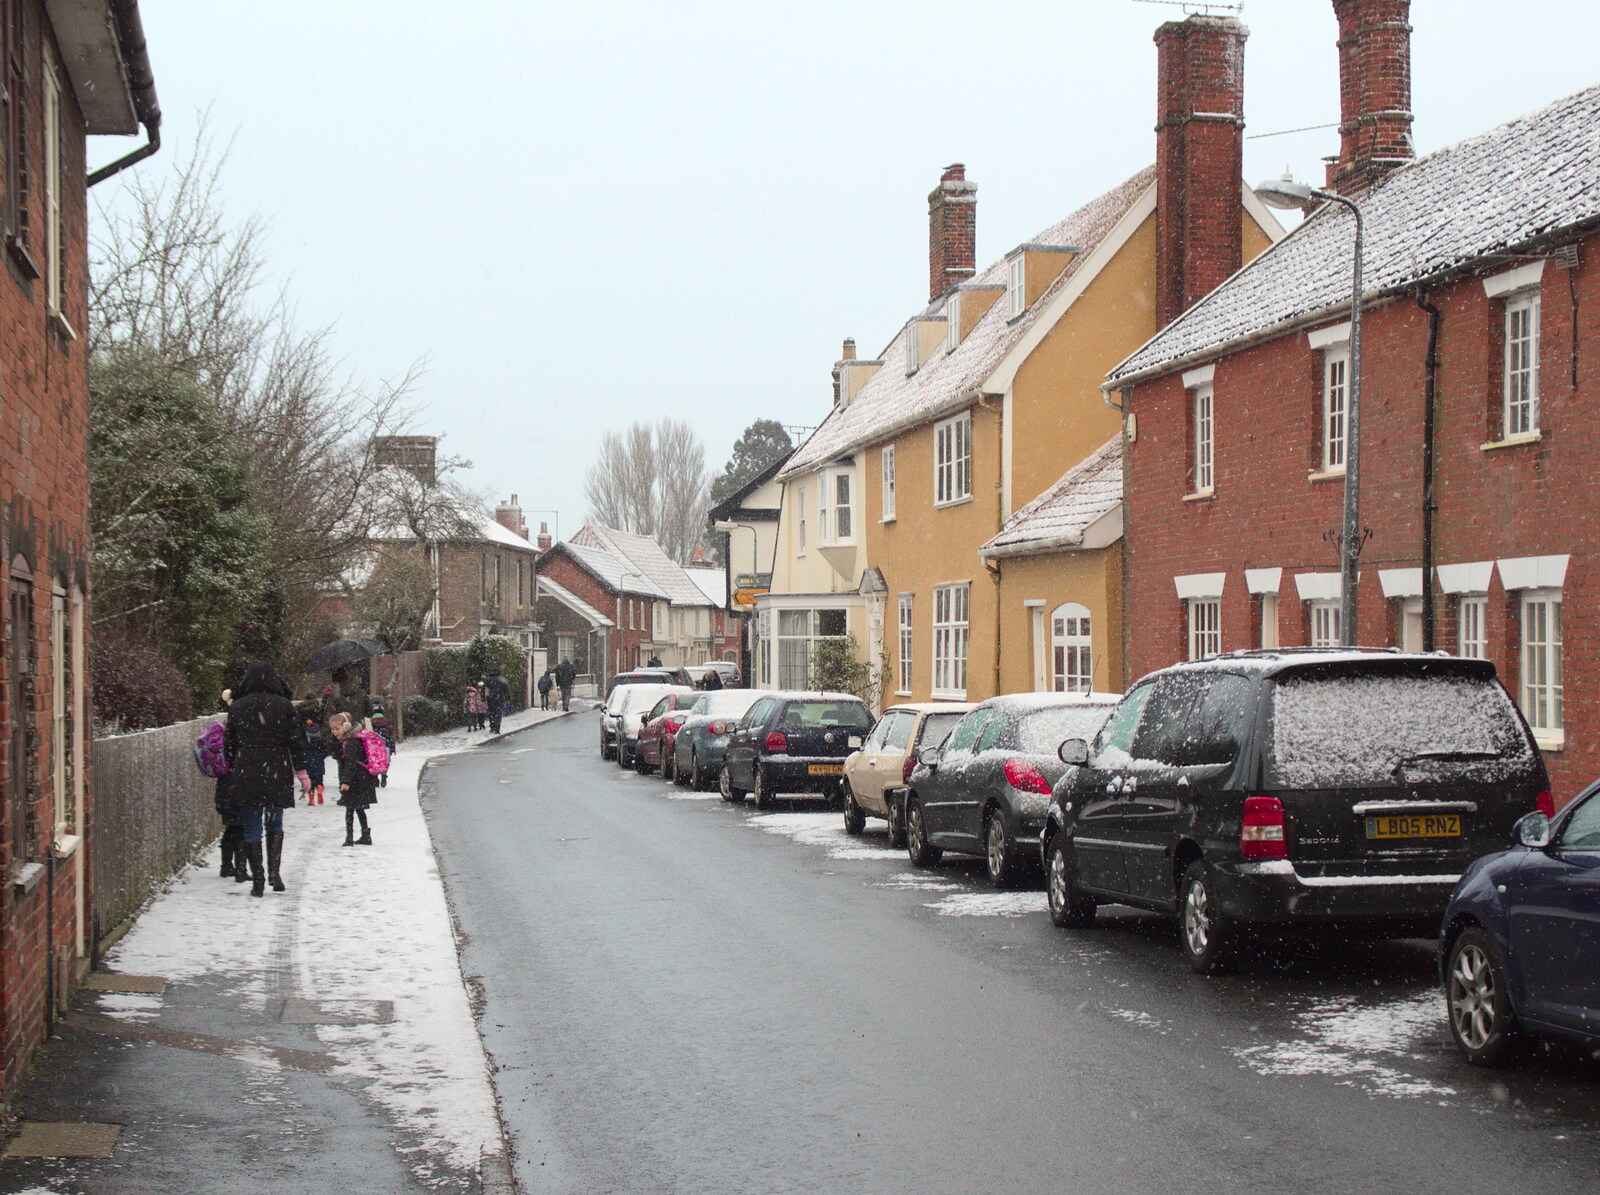 Church Street in Eye, on the walk to school from A Snowy January Miscellany, Eye, Suffolk - 15th January 2017